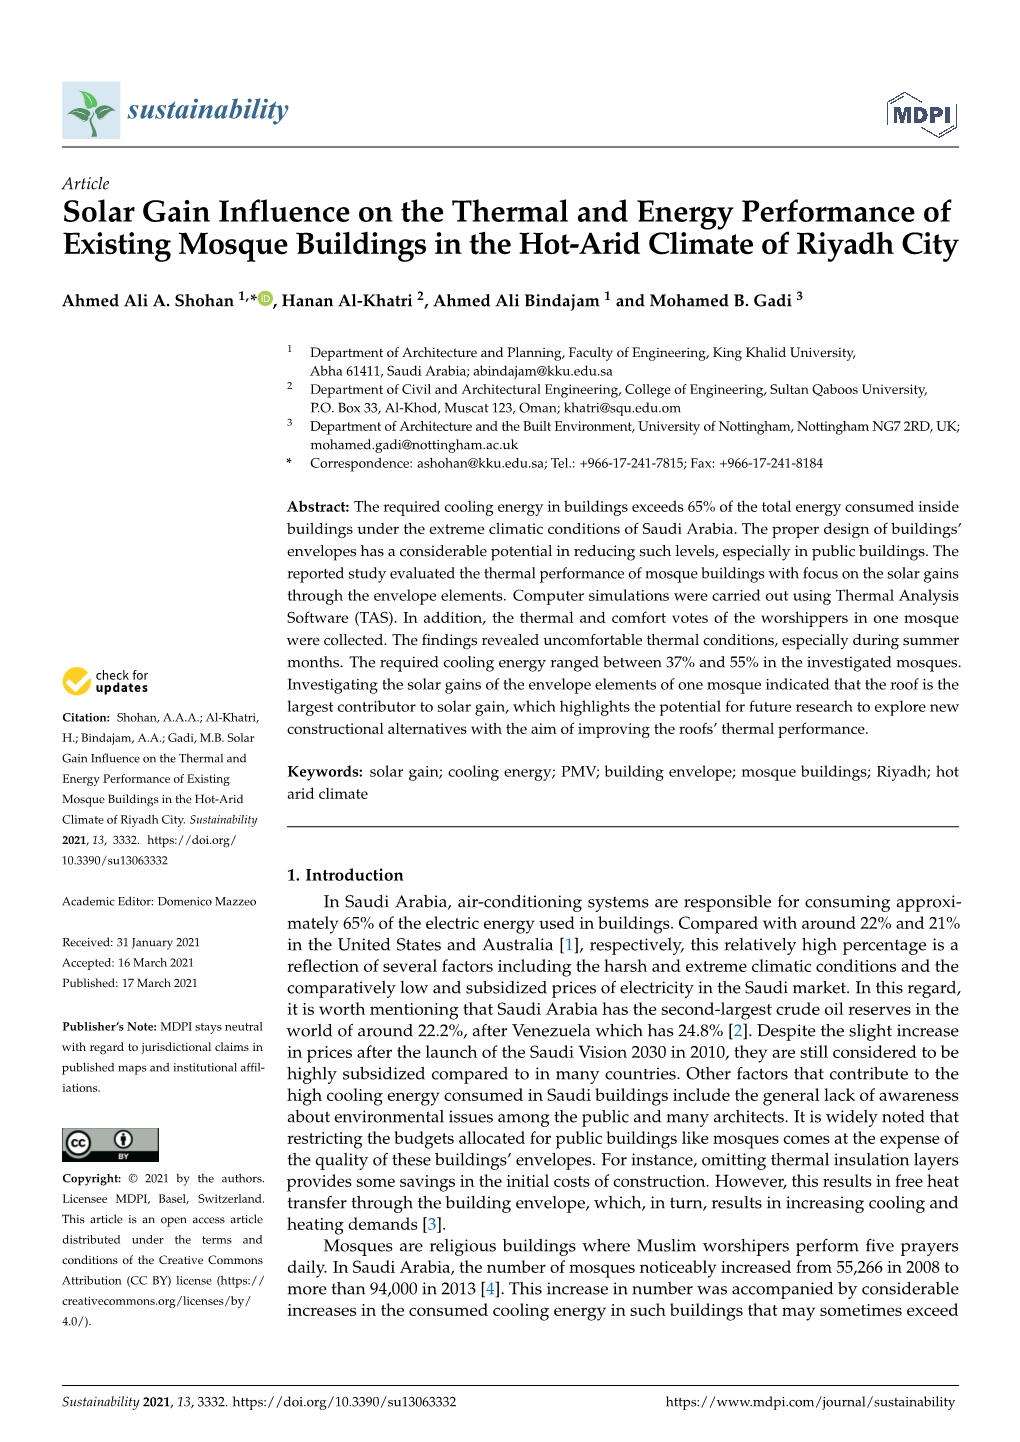 Solar Gain Influence on the Thermal and Energy Performance of Existing Mosque Buildings in the Hot-Arid Climate of Riyadh City